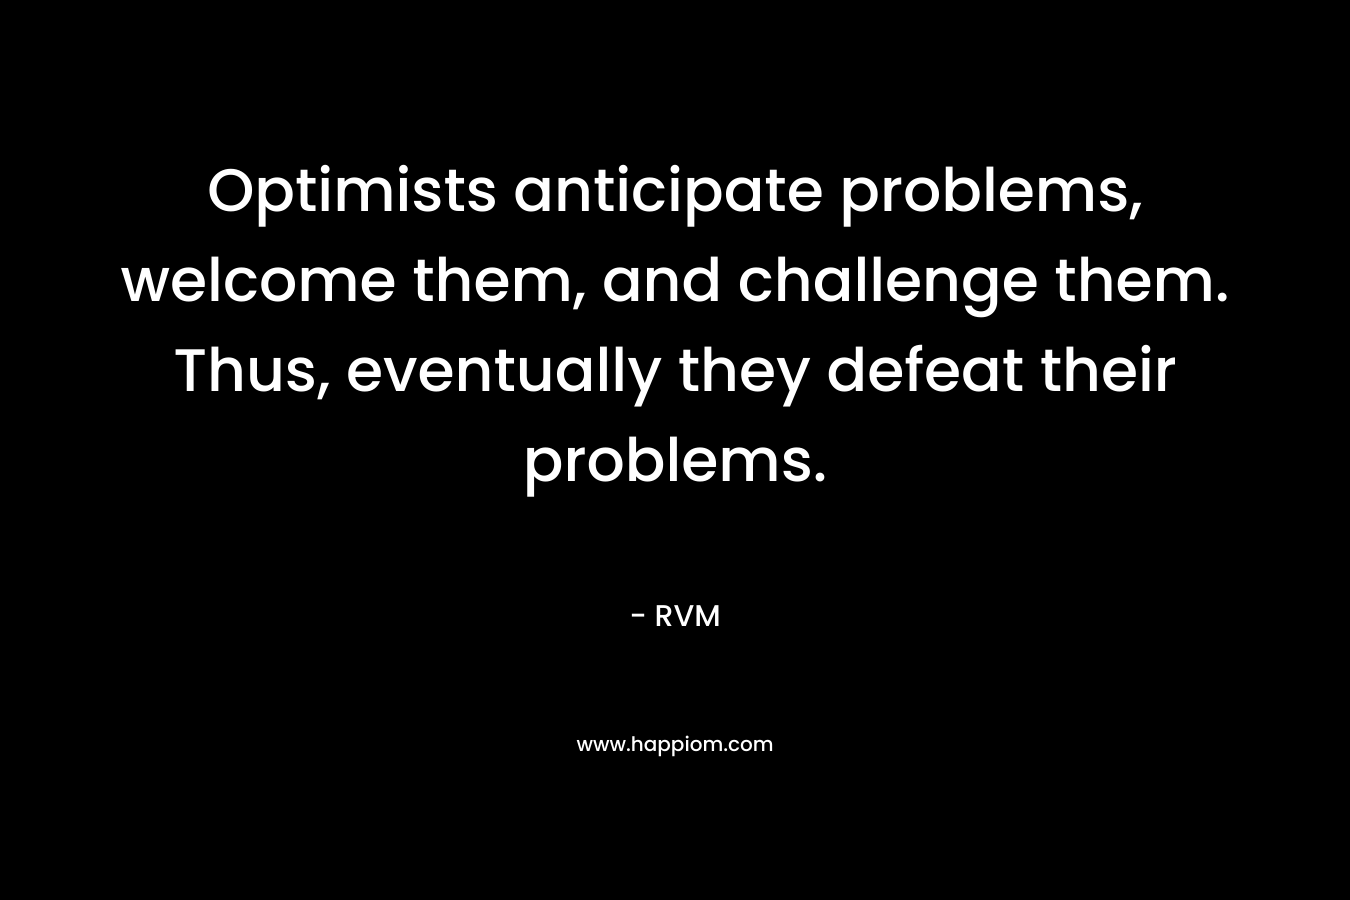 Optimists anticipate problems, welcome them, and challenge them. Thus, eventually they defeat their problems. – RVM